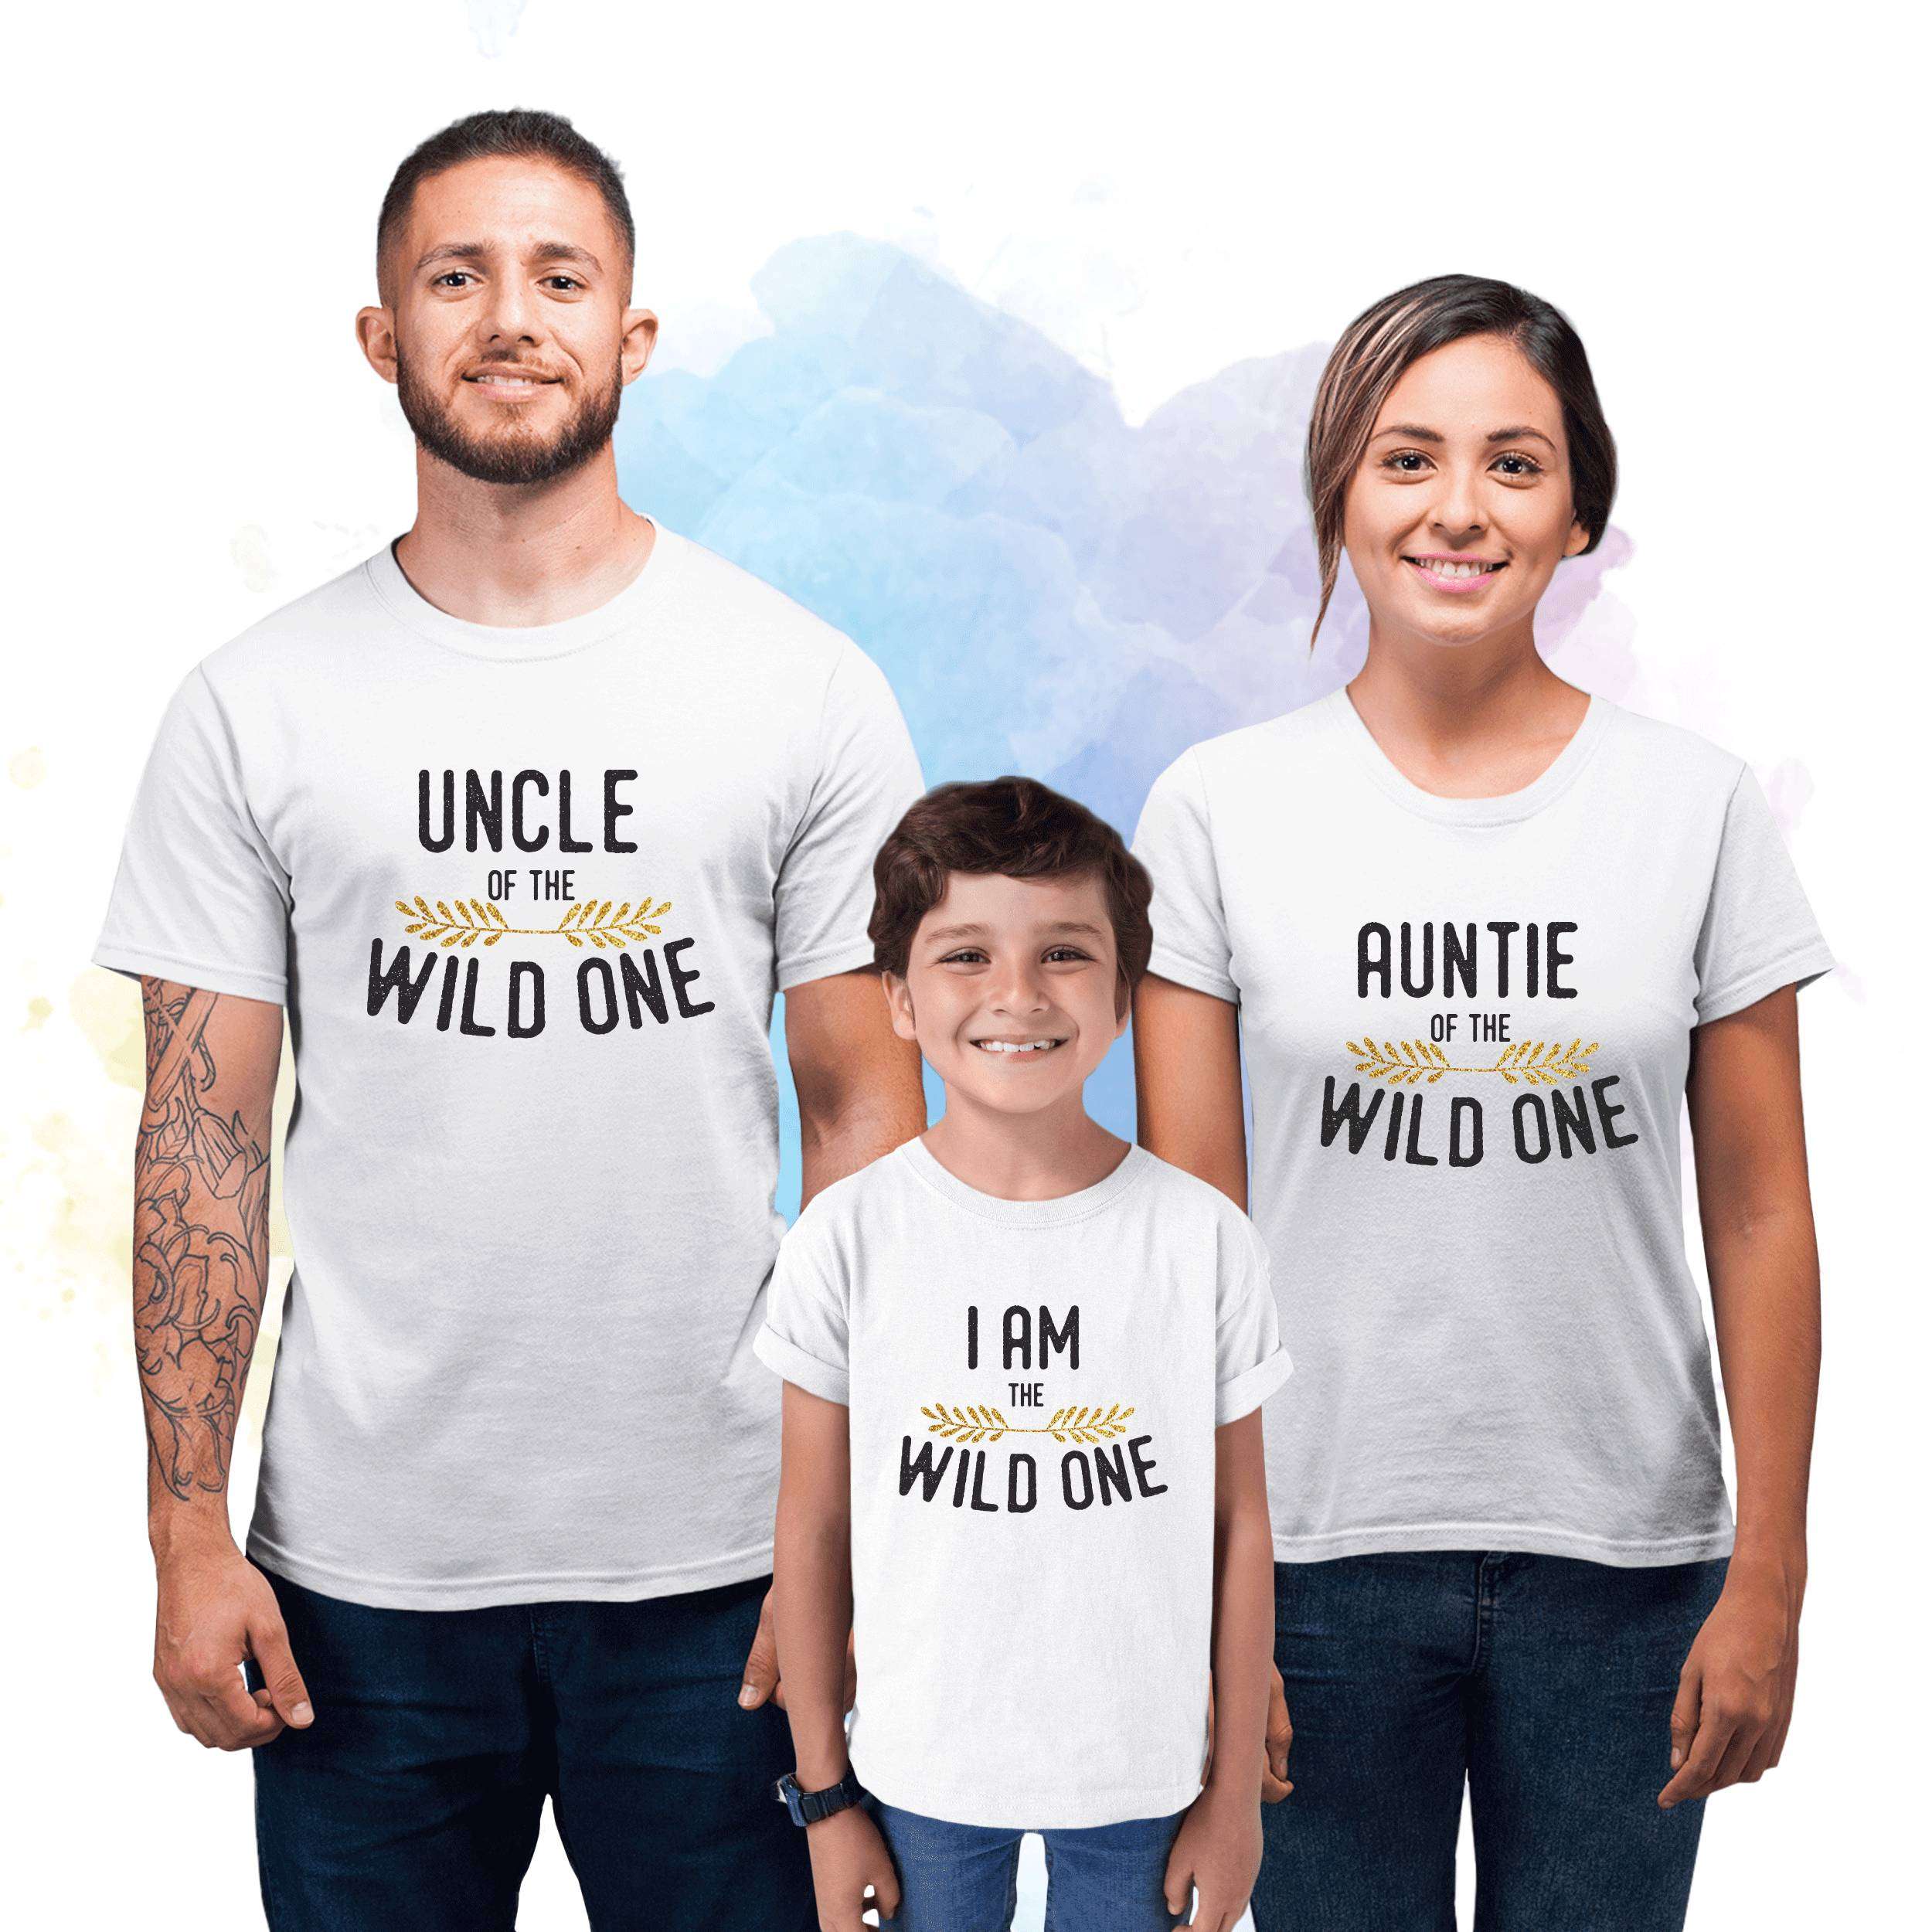 Aunt and uncle shirts